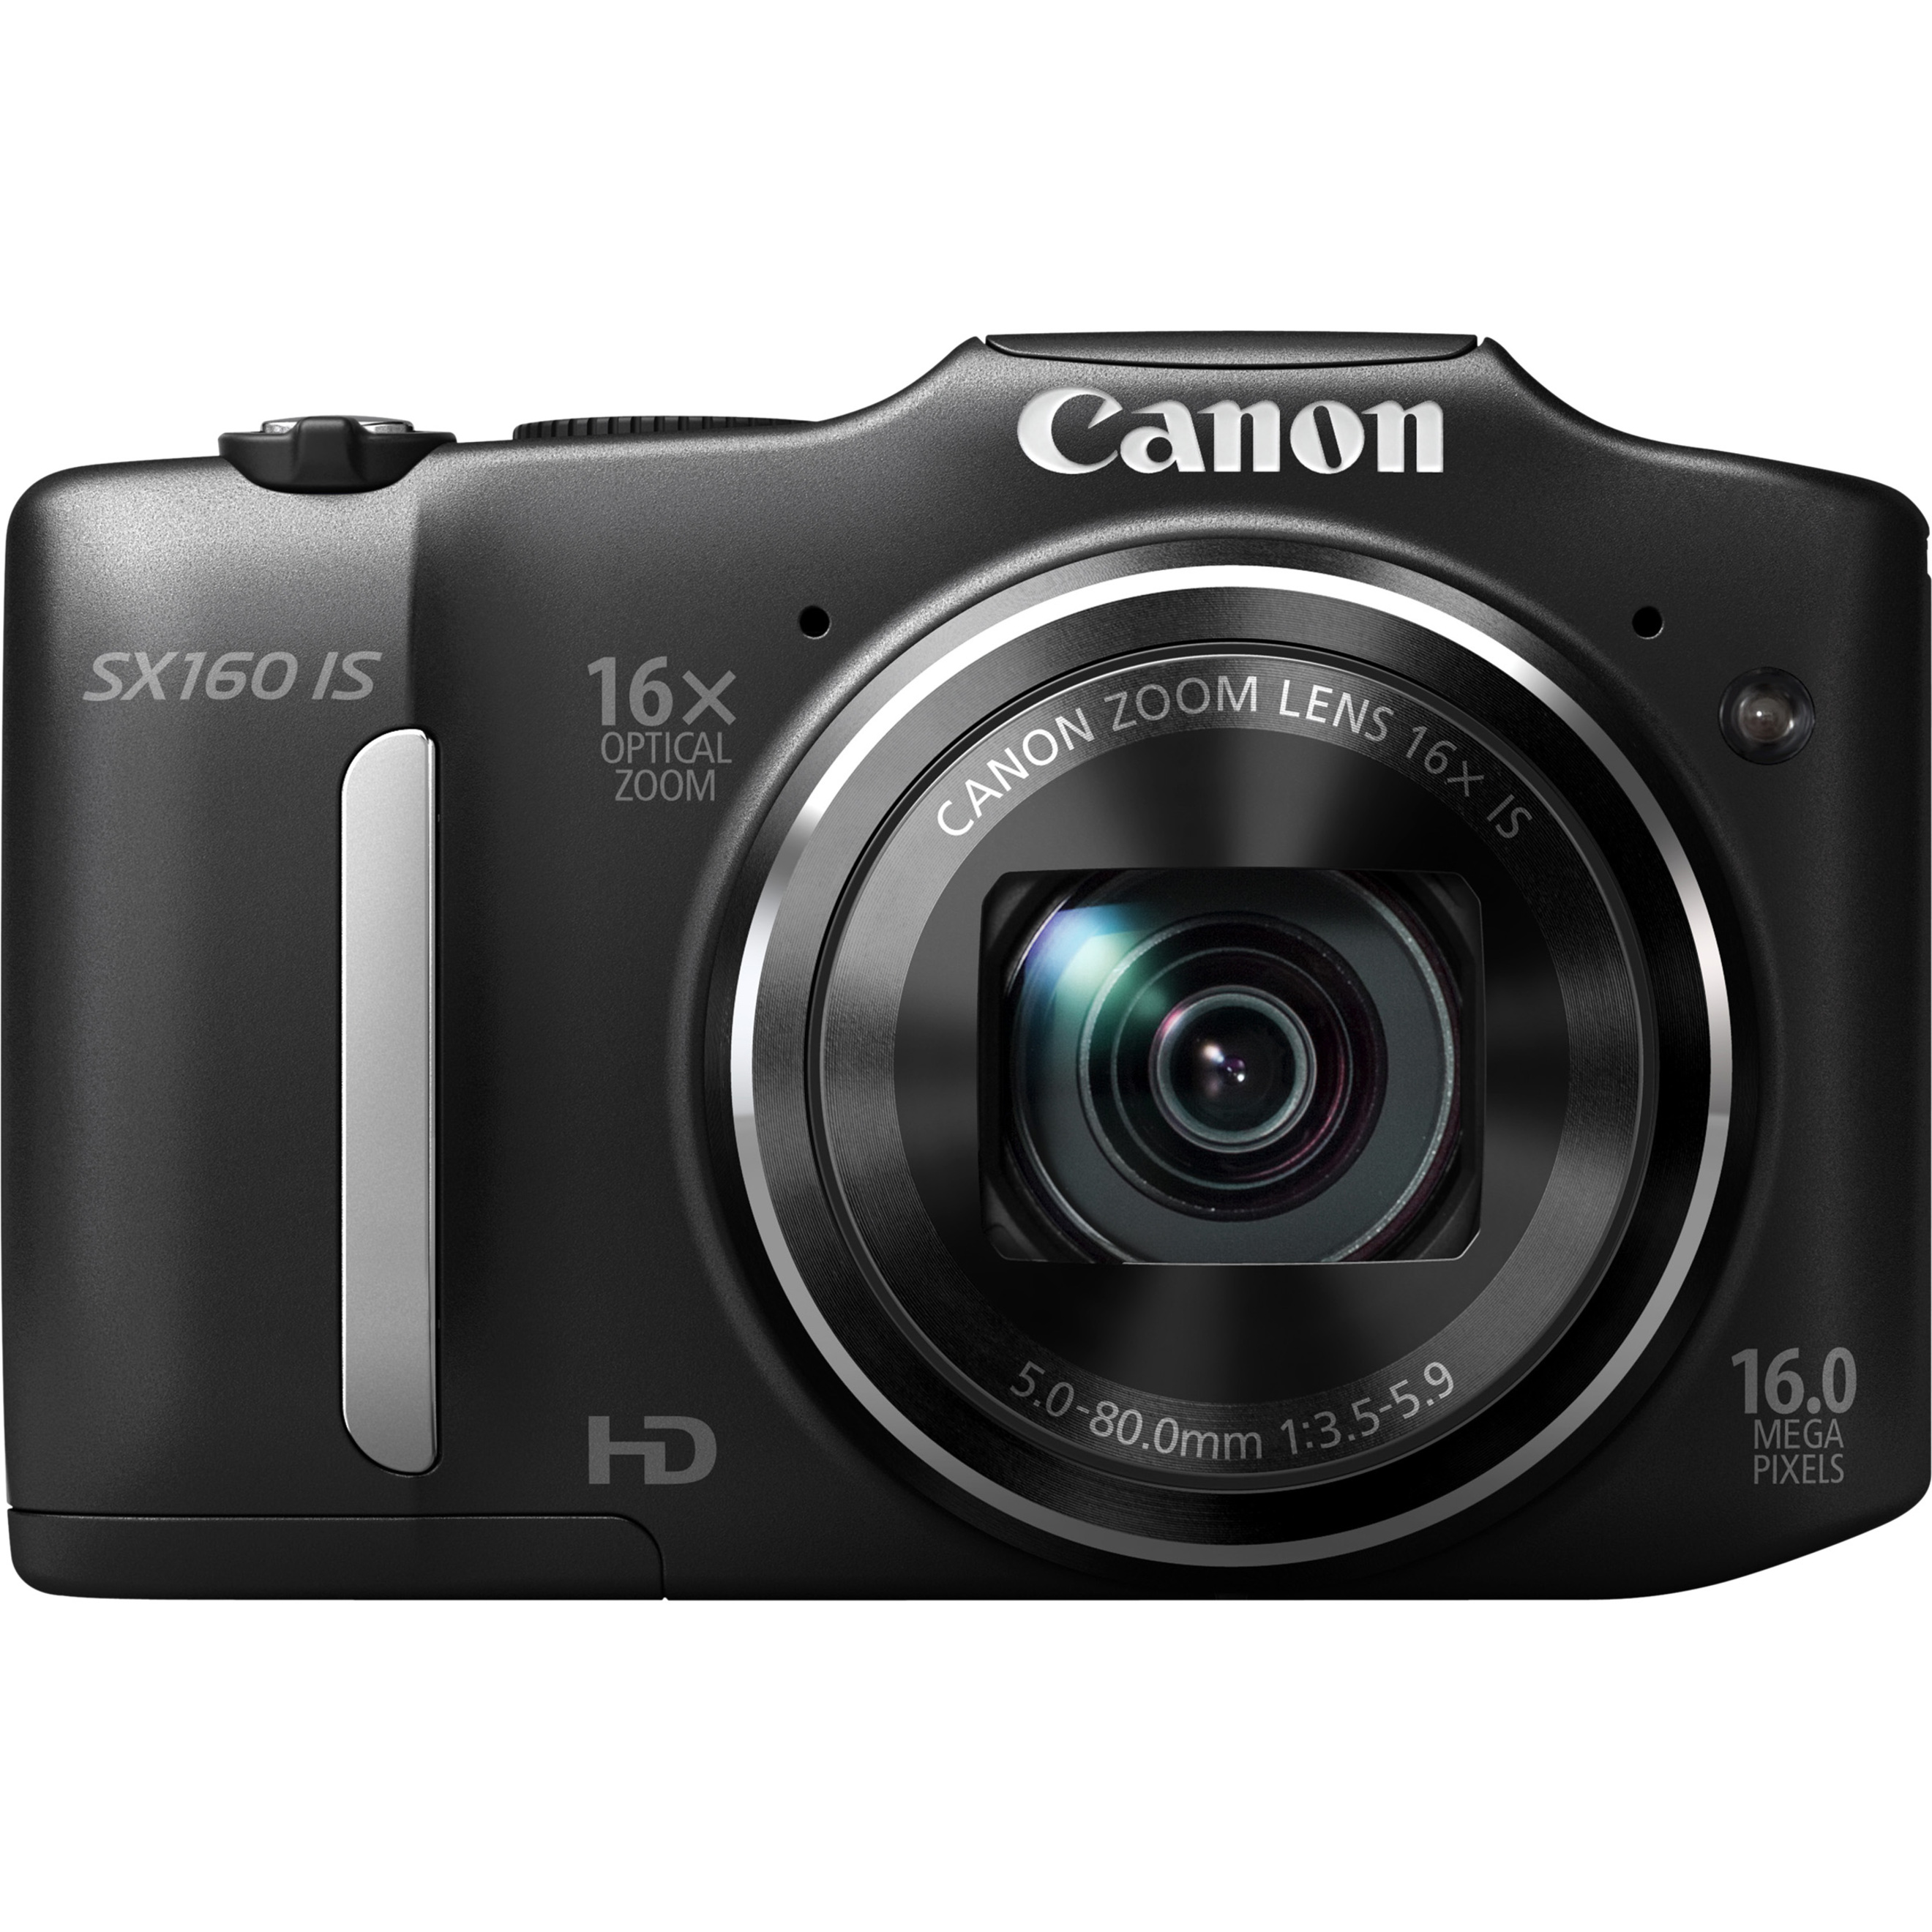 Canon PowerShot SX160 IS 16 Megapixel Compact Camera, Black - image 1 of 4